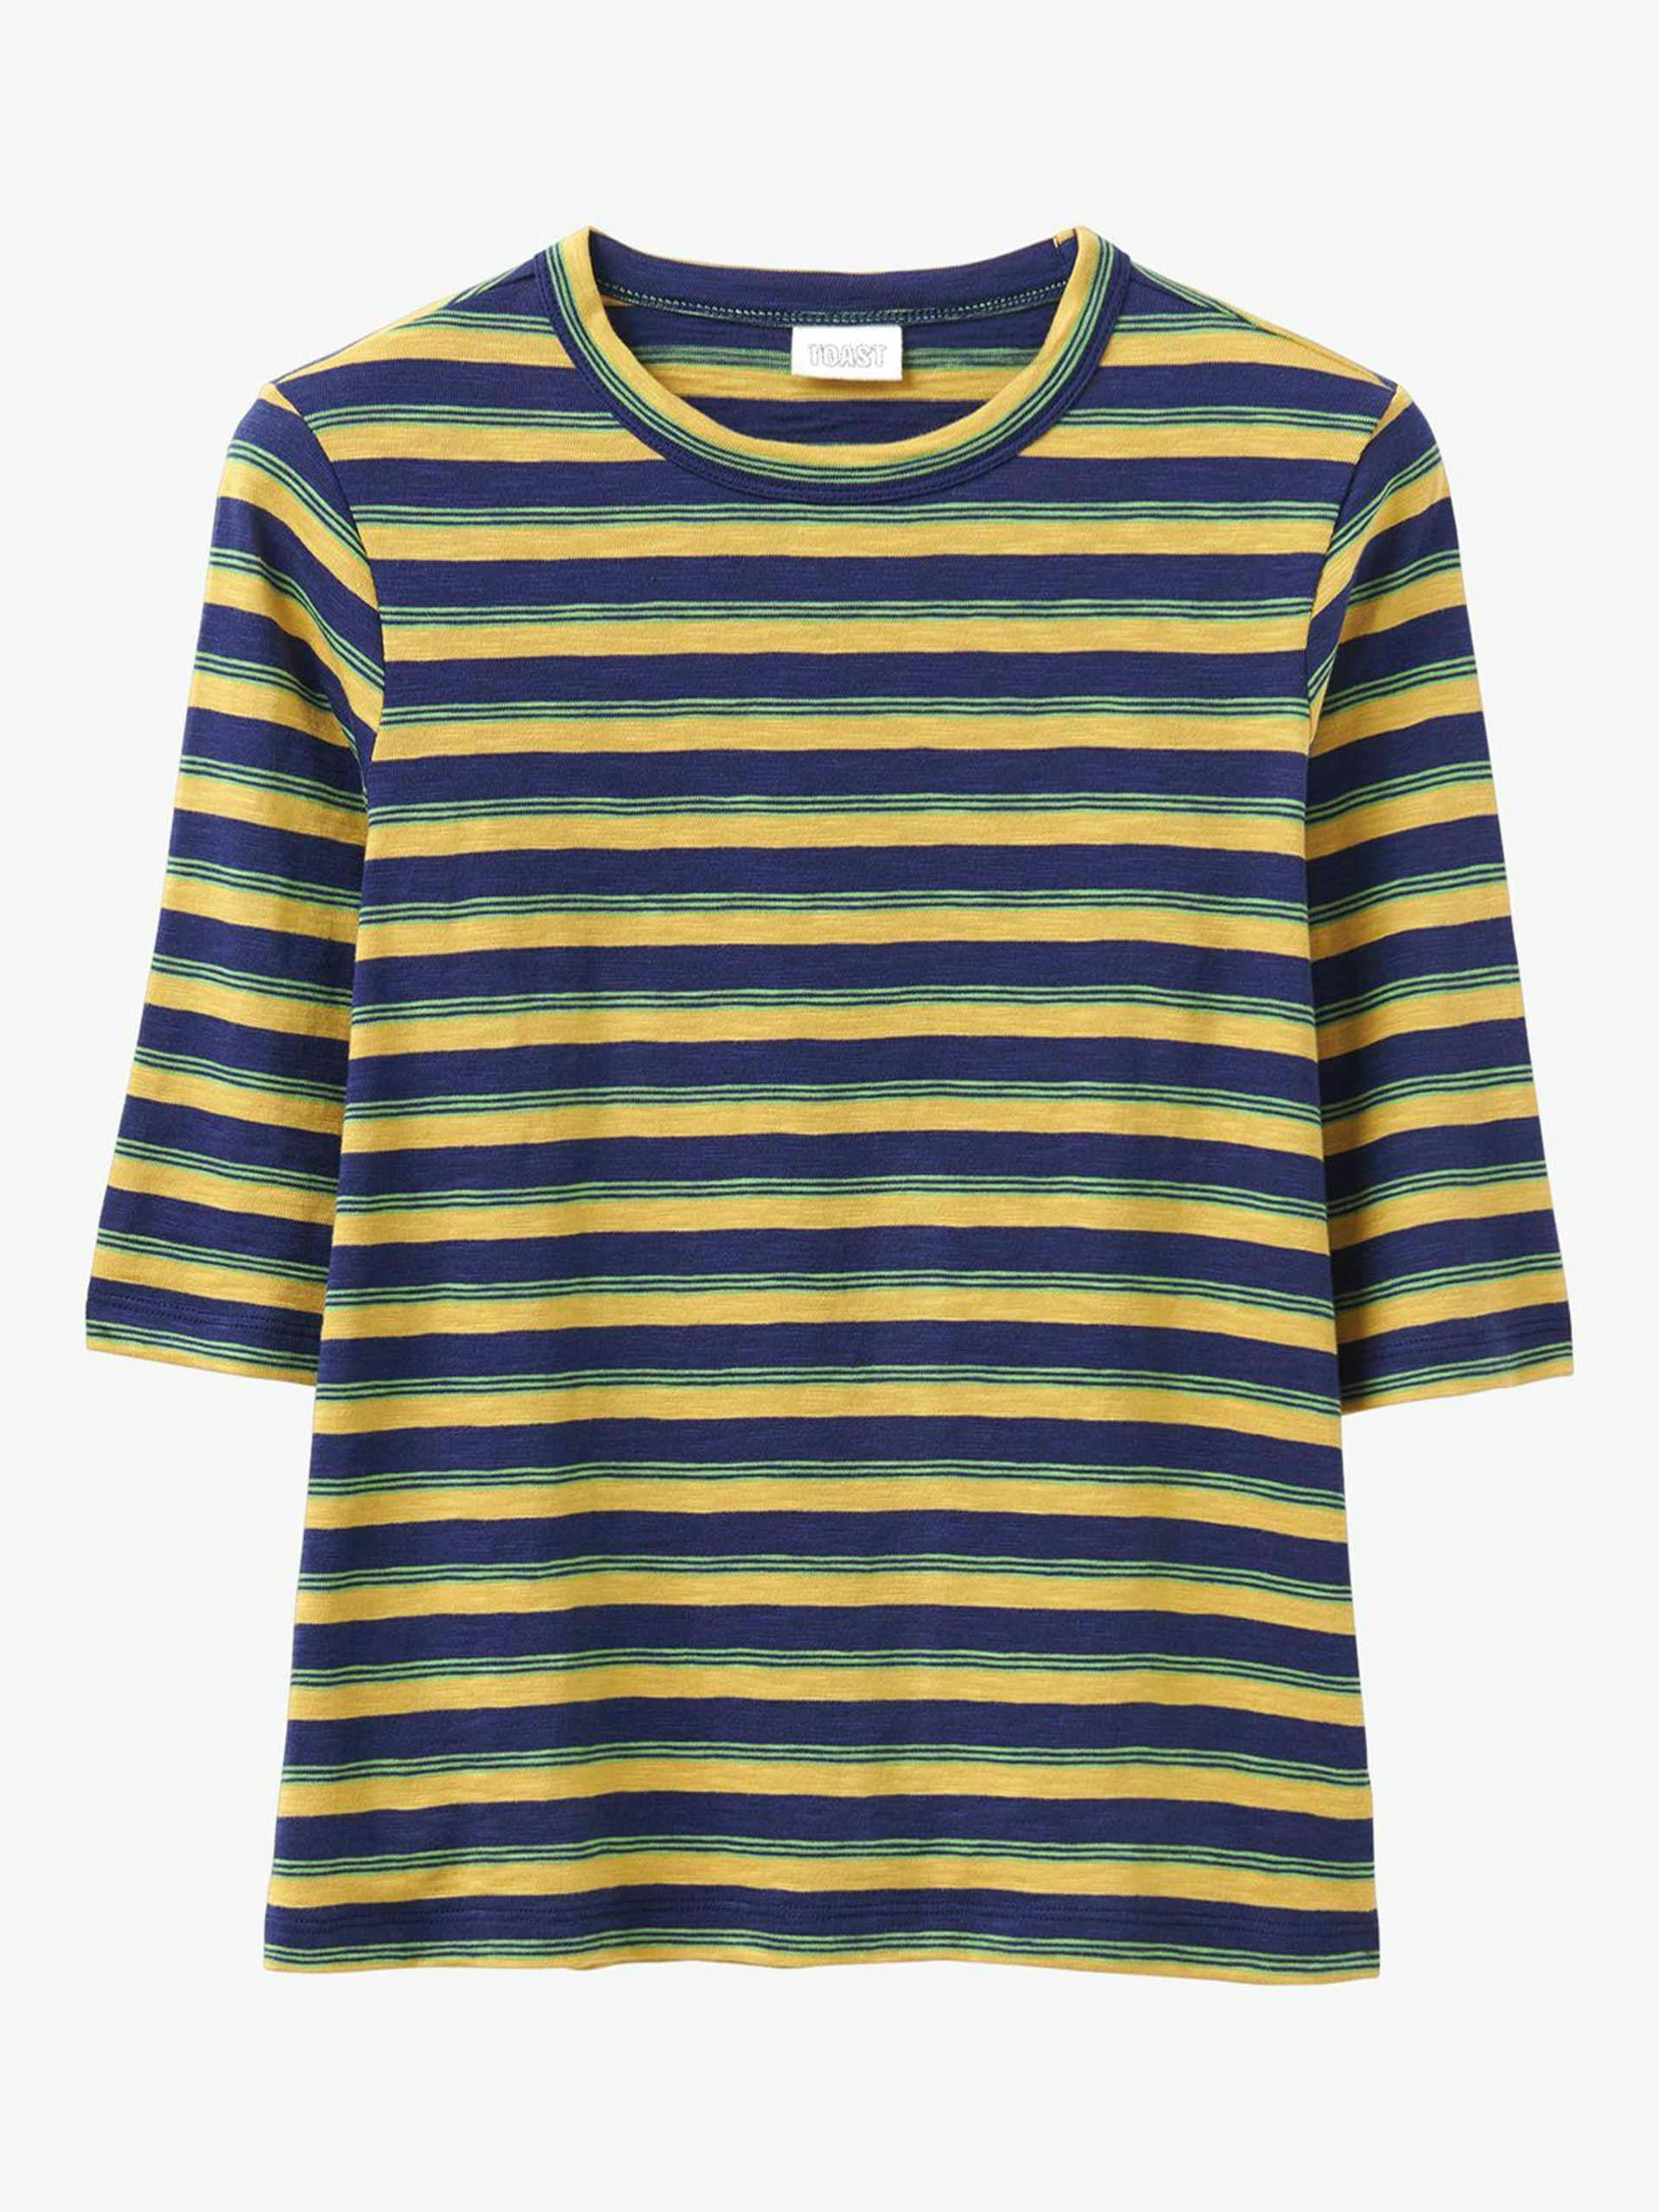 Blue yellow and green striped t-shirt